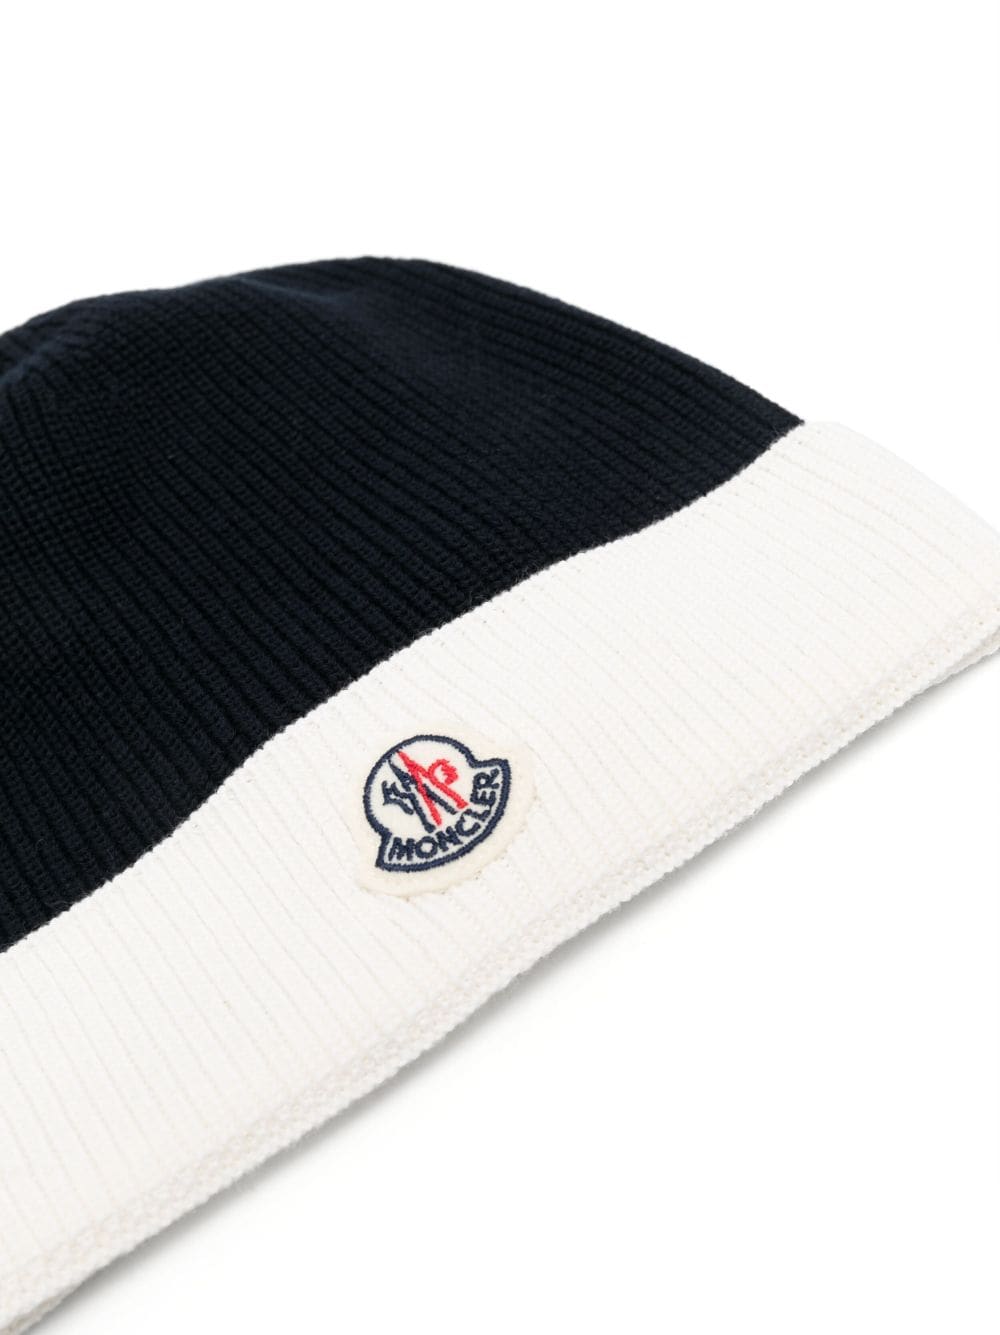 Moncler kids hat with logo